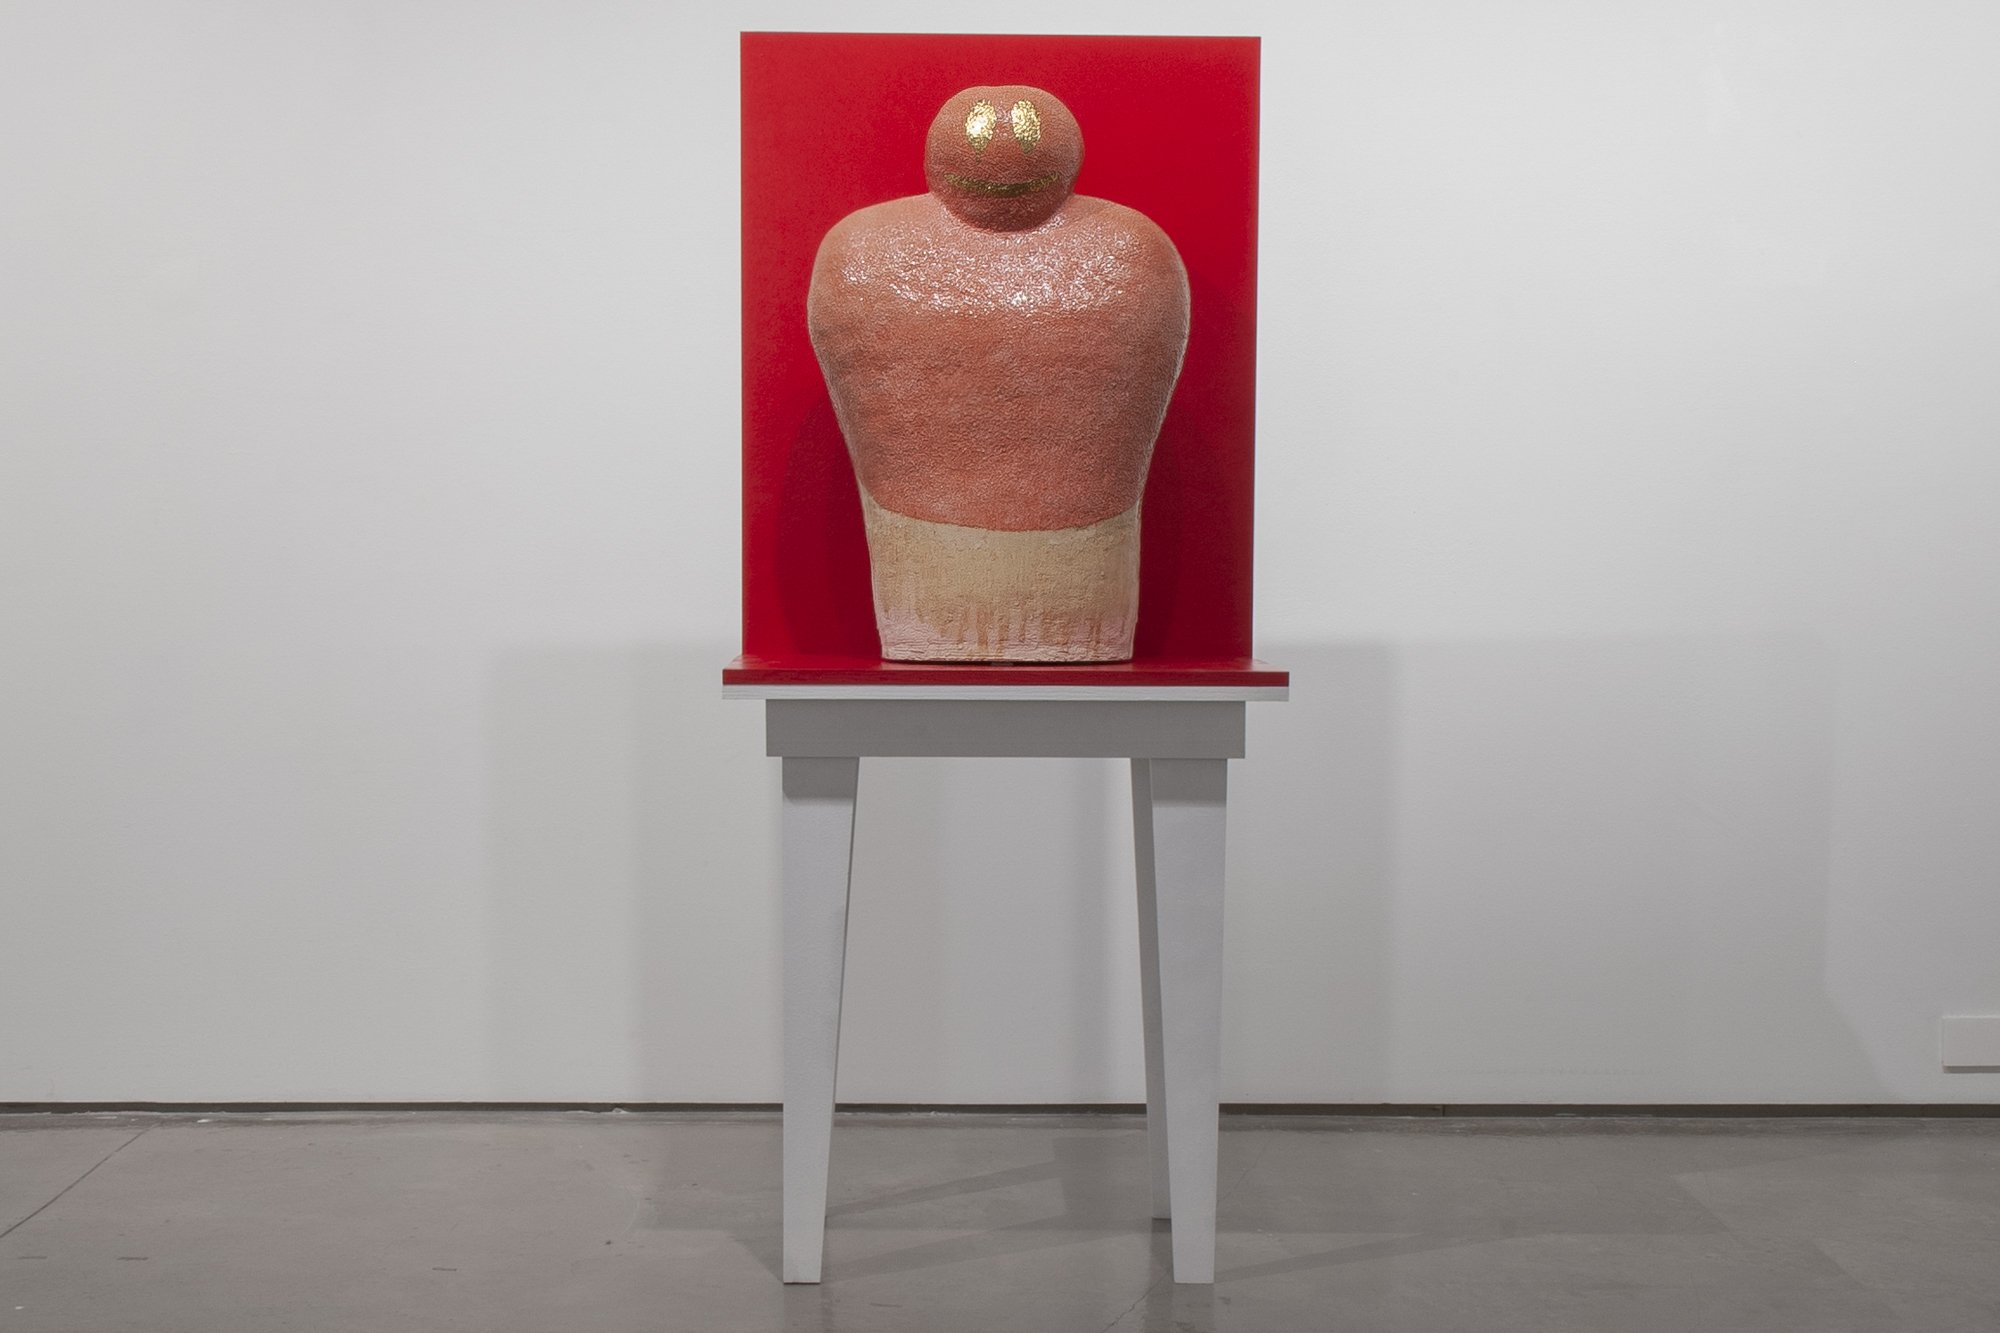  I’m So Happy To See You Ceramic, Glaze, Gold luster, Plywood, Paint 65” x 28” x 22” 2015  